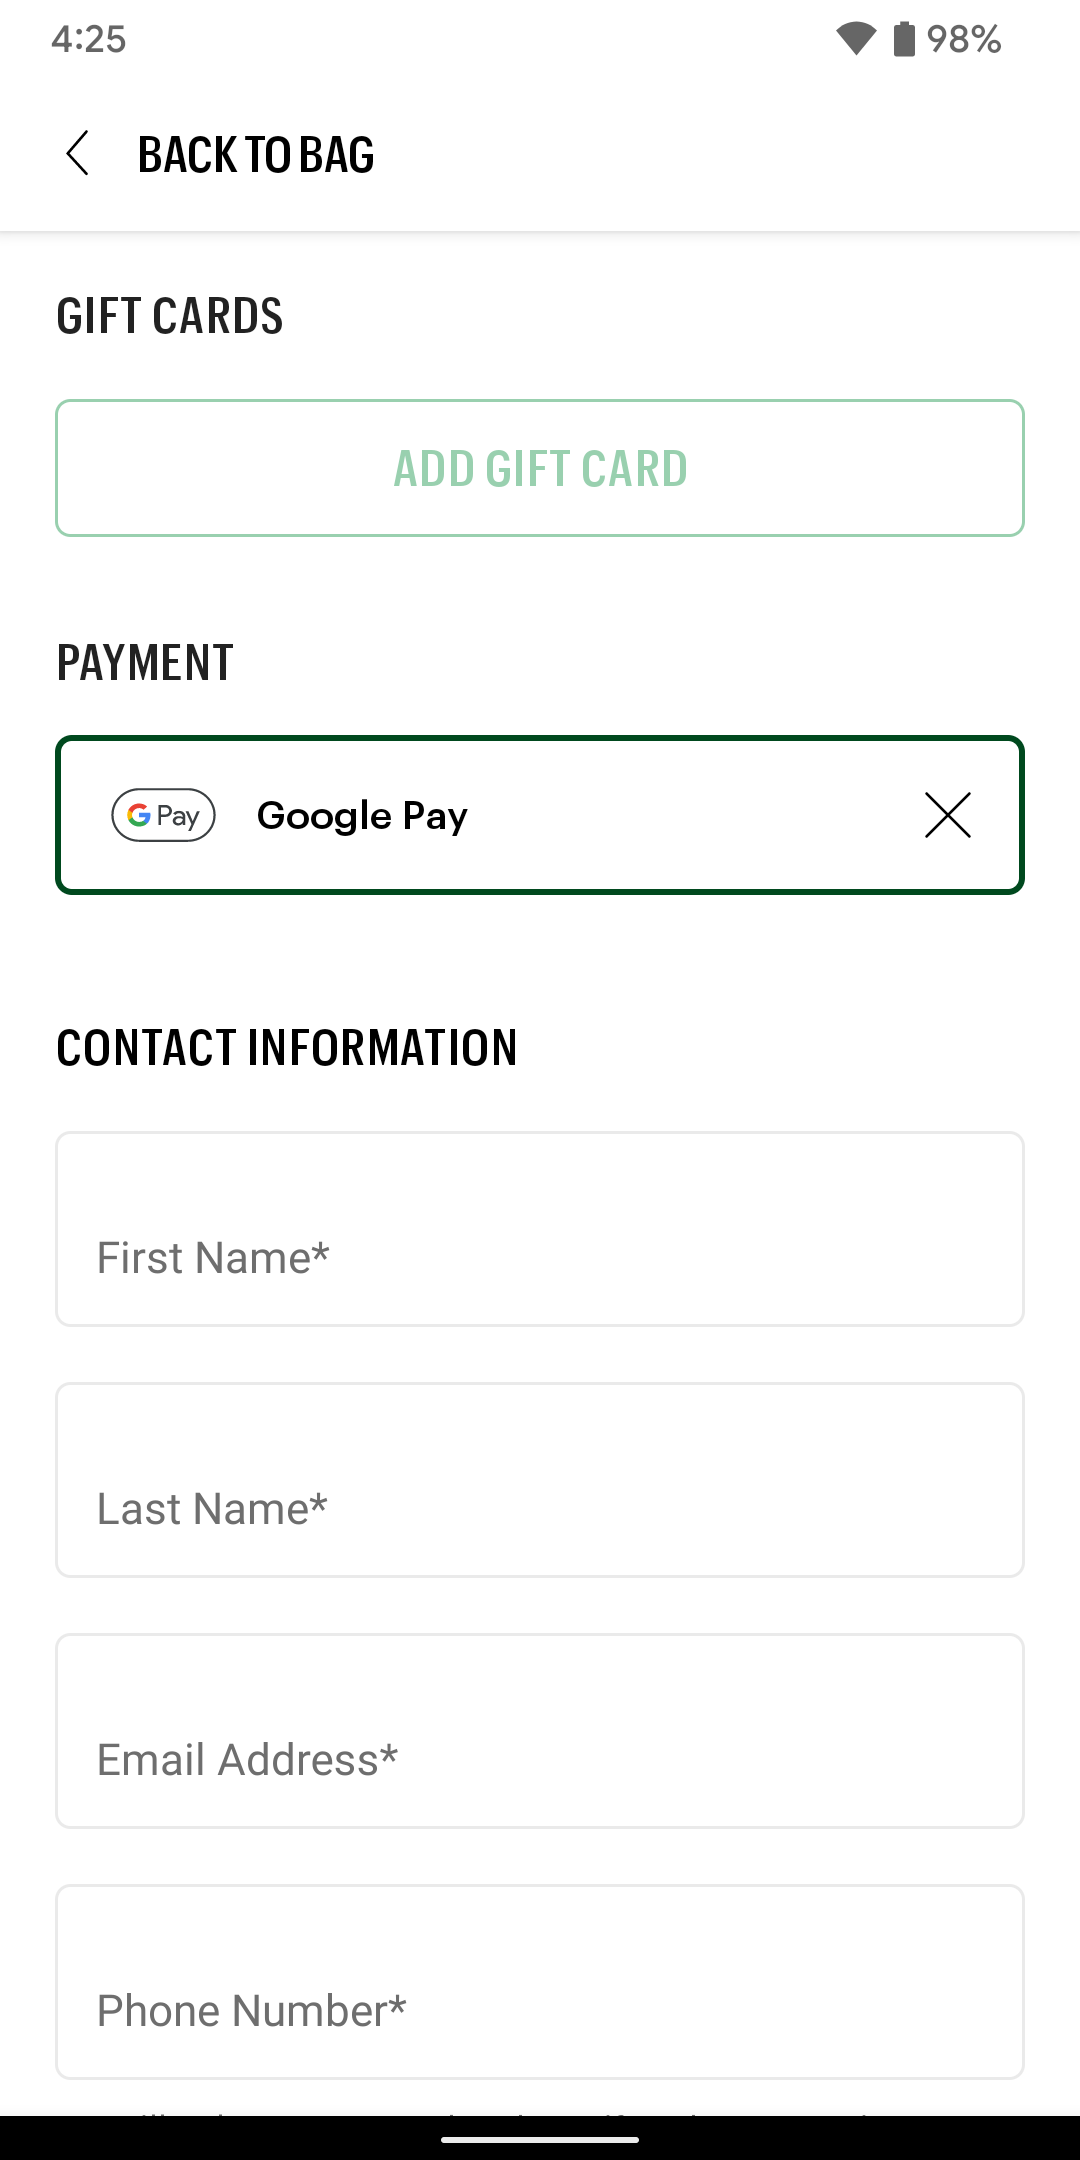 Subway accepts Google Pay in its app.